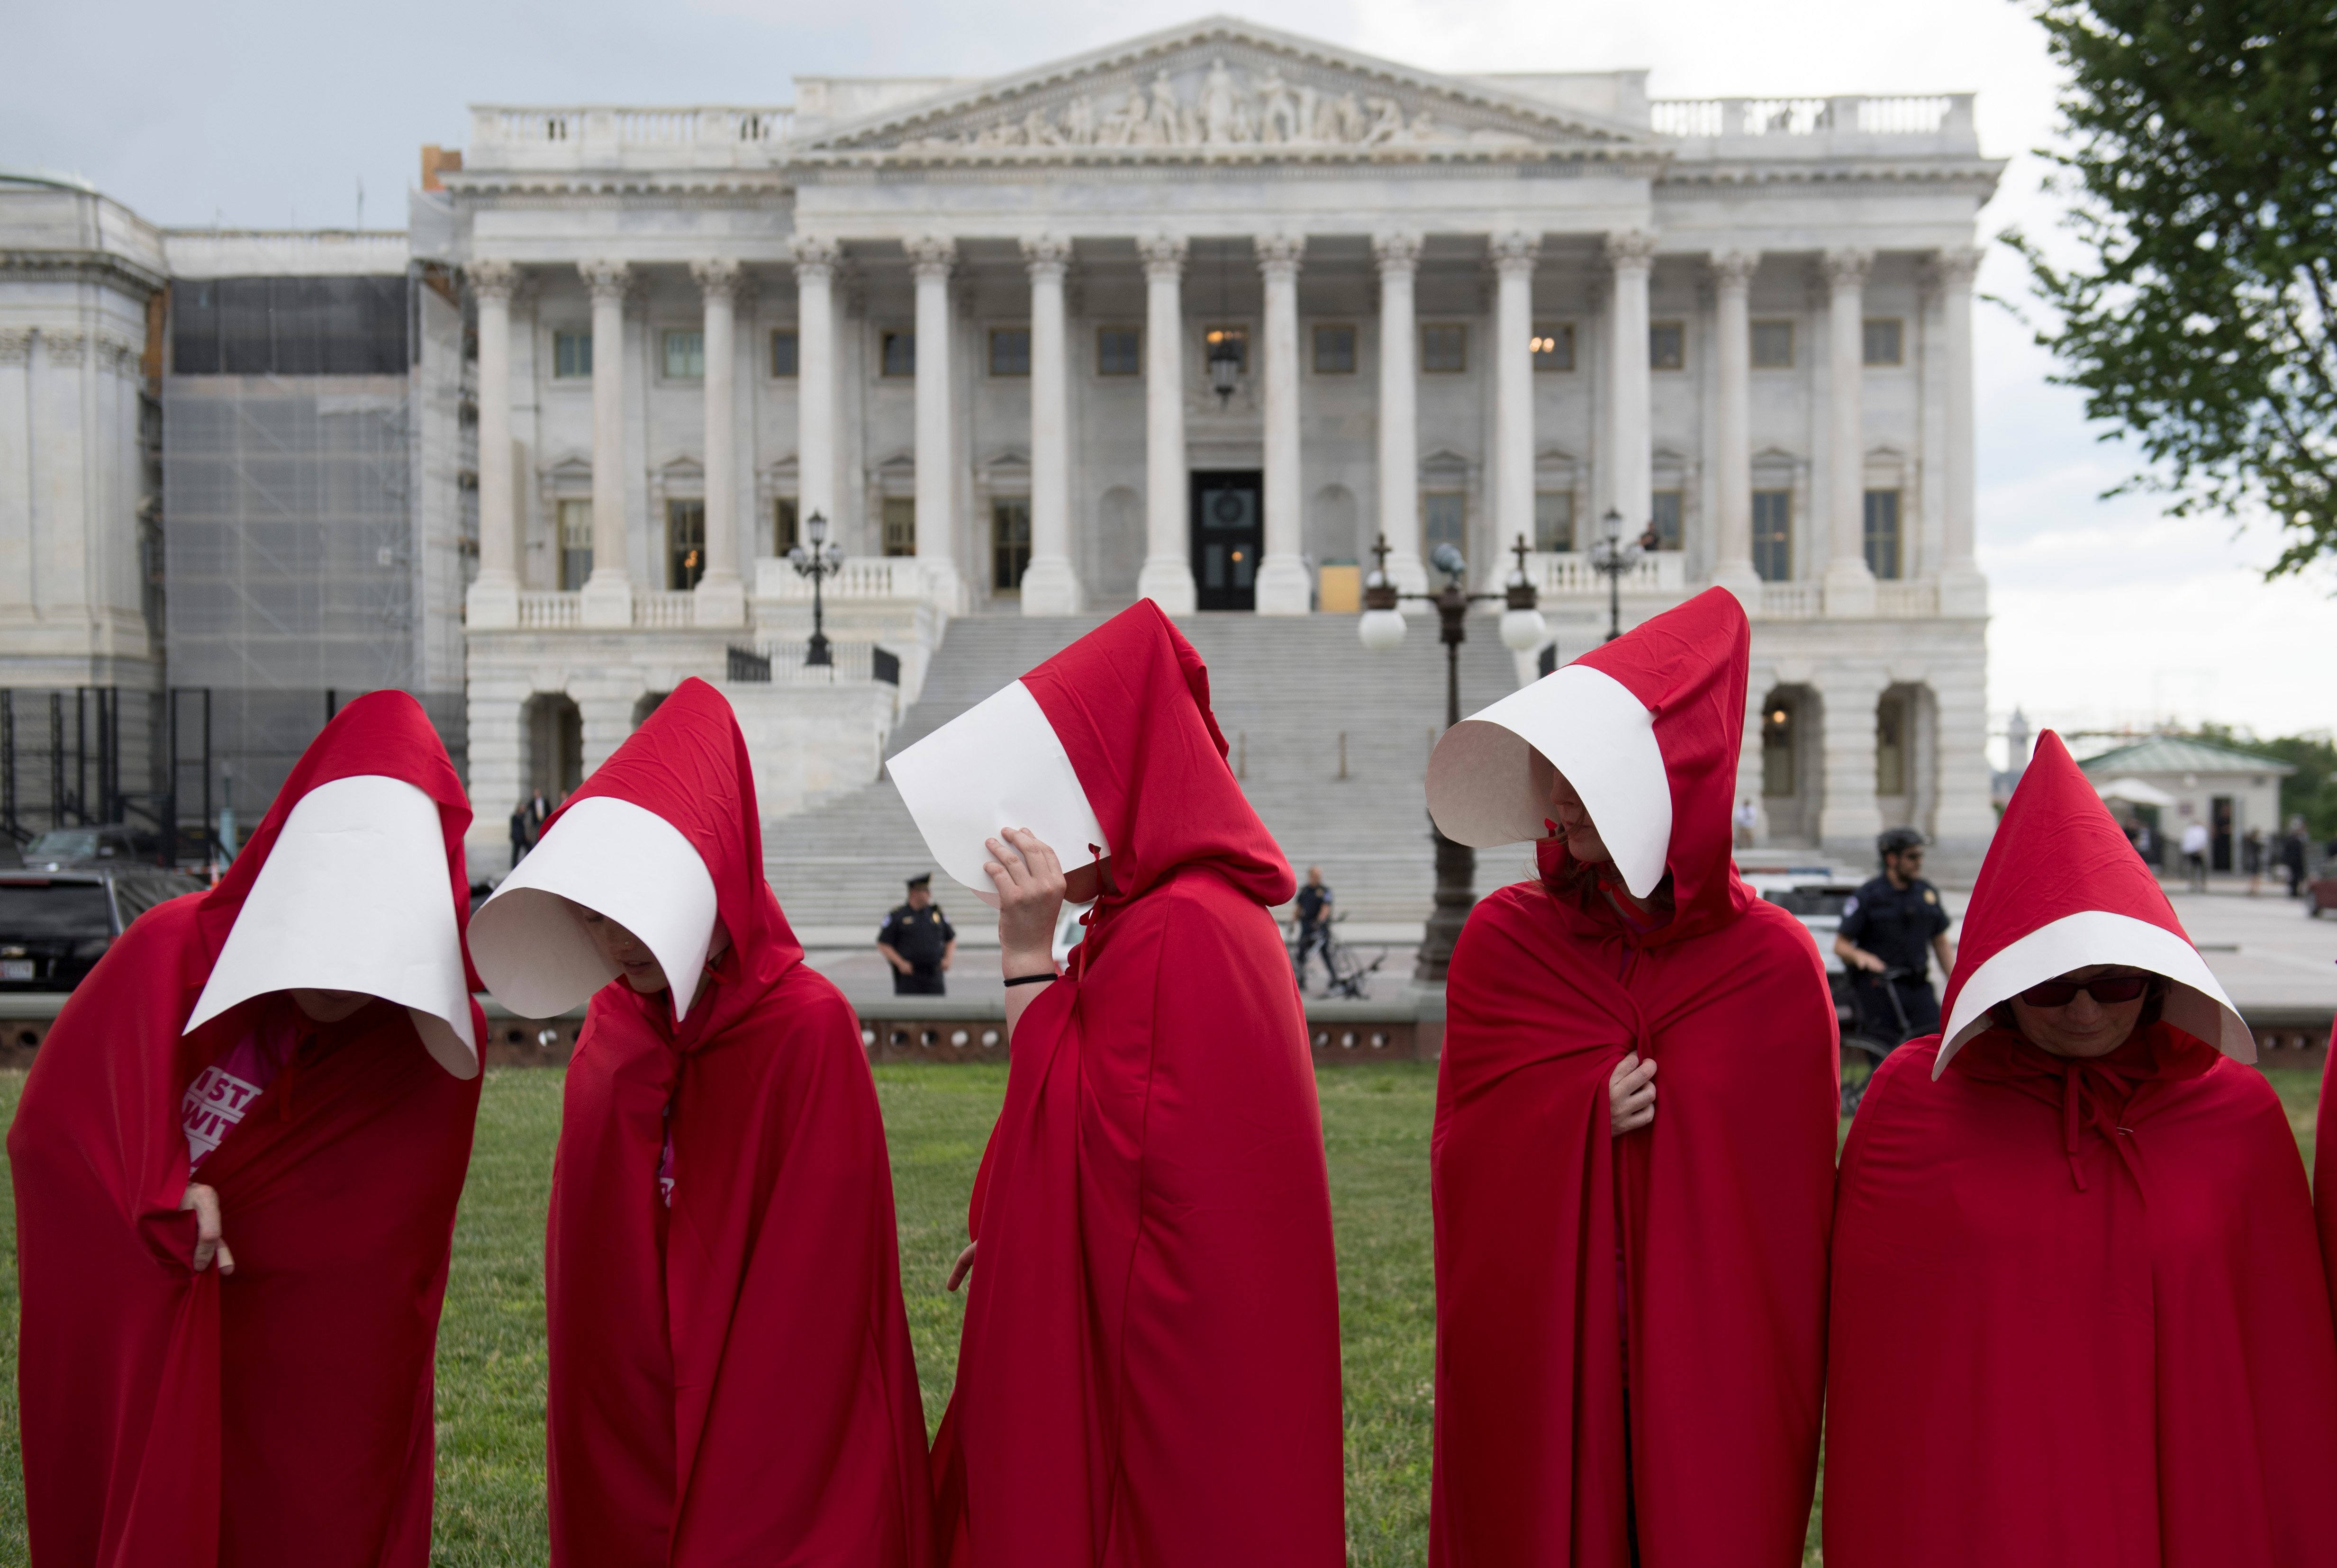 Supporters of Planned Parenthood dressed as characters from "The Handmaid's Tale," hold a rally as they protest the US Senate Republicans' healthcare bill outside the US Capitol in Washington, DC, June 27, 2017. / AFP PHOTO / SAUL LOEB (Photo credit should read SAUL LOEB/AFP via Getty Images)